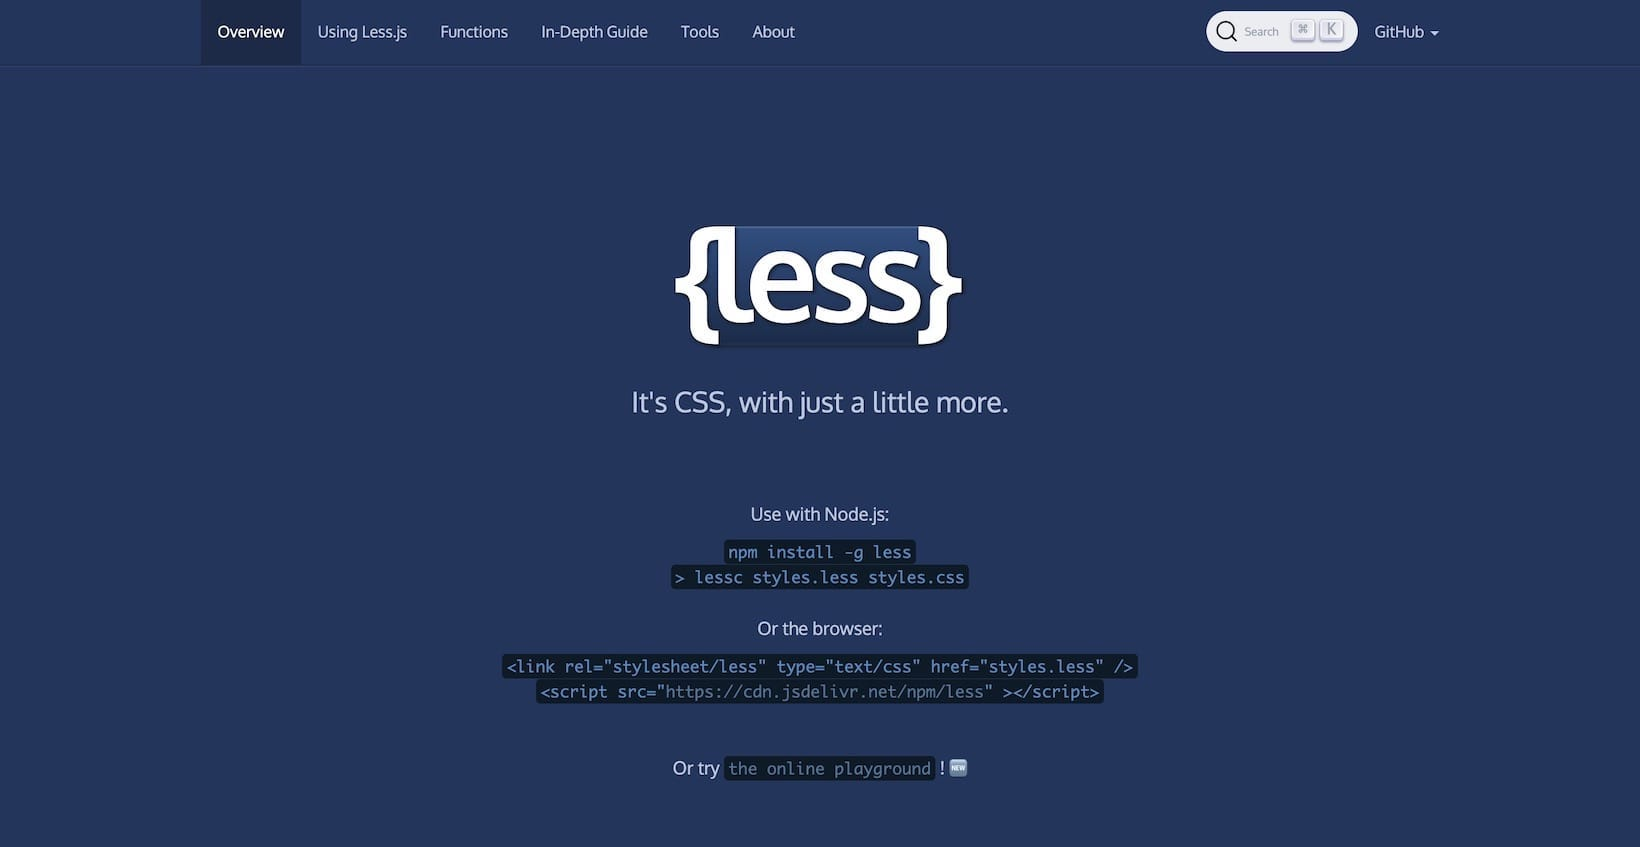 Screenshot of the Less homepage that includes the heading "It's CSS, with just a little more".